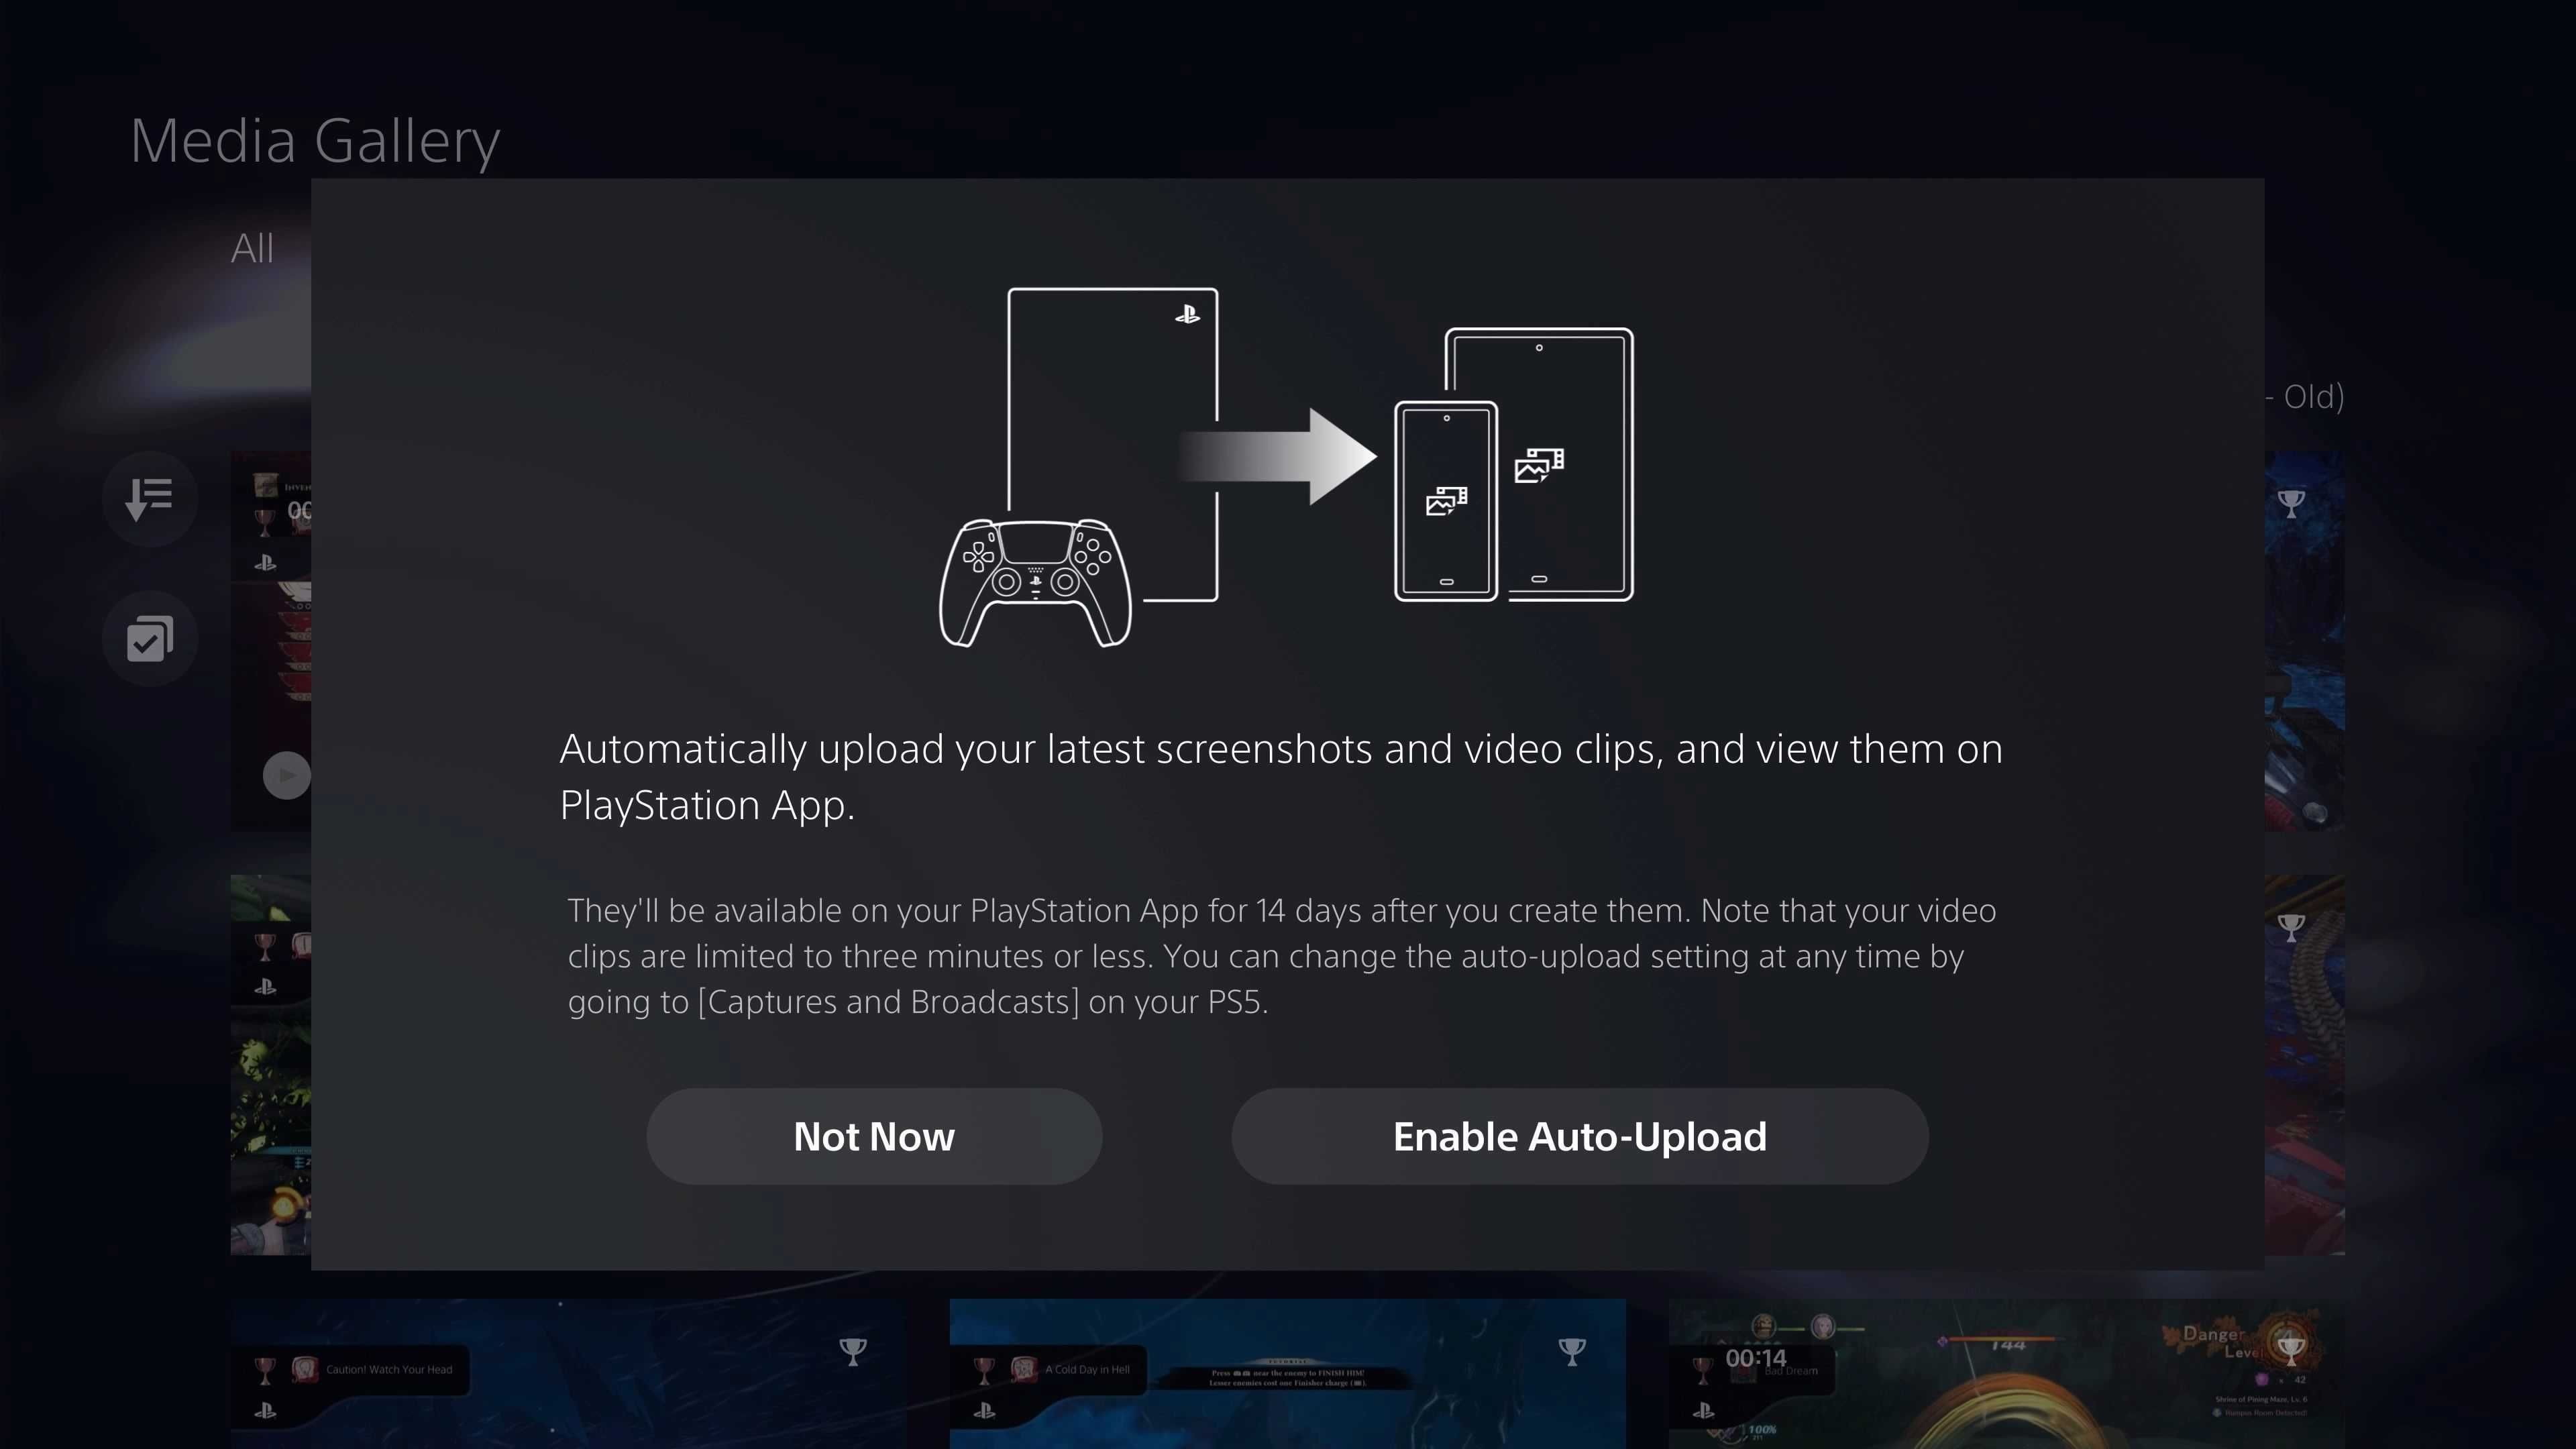 PS5 media library captures enable auto upload option screen